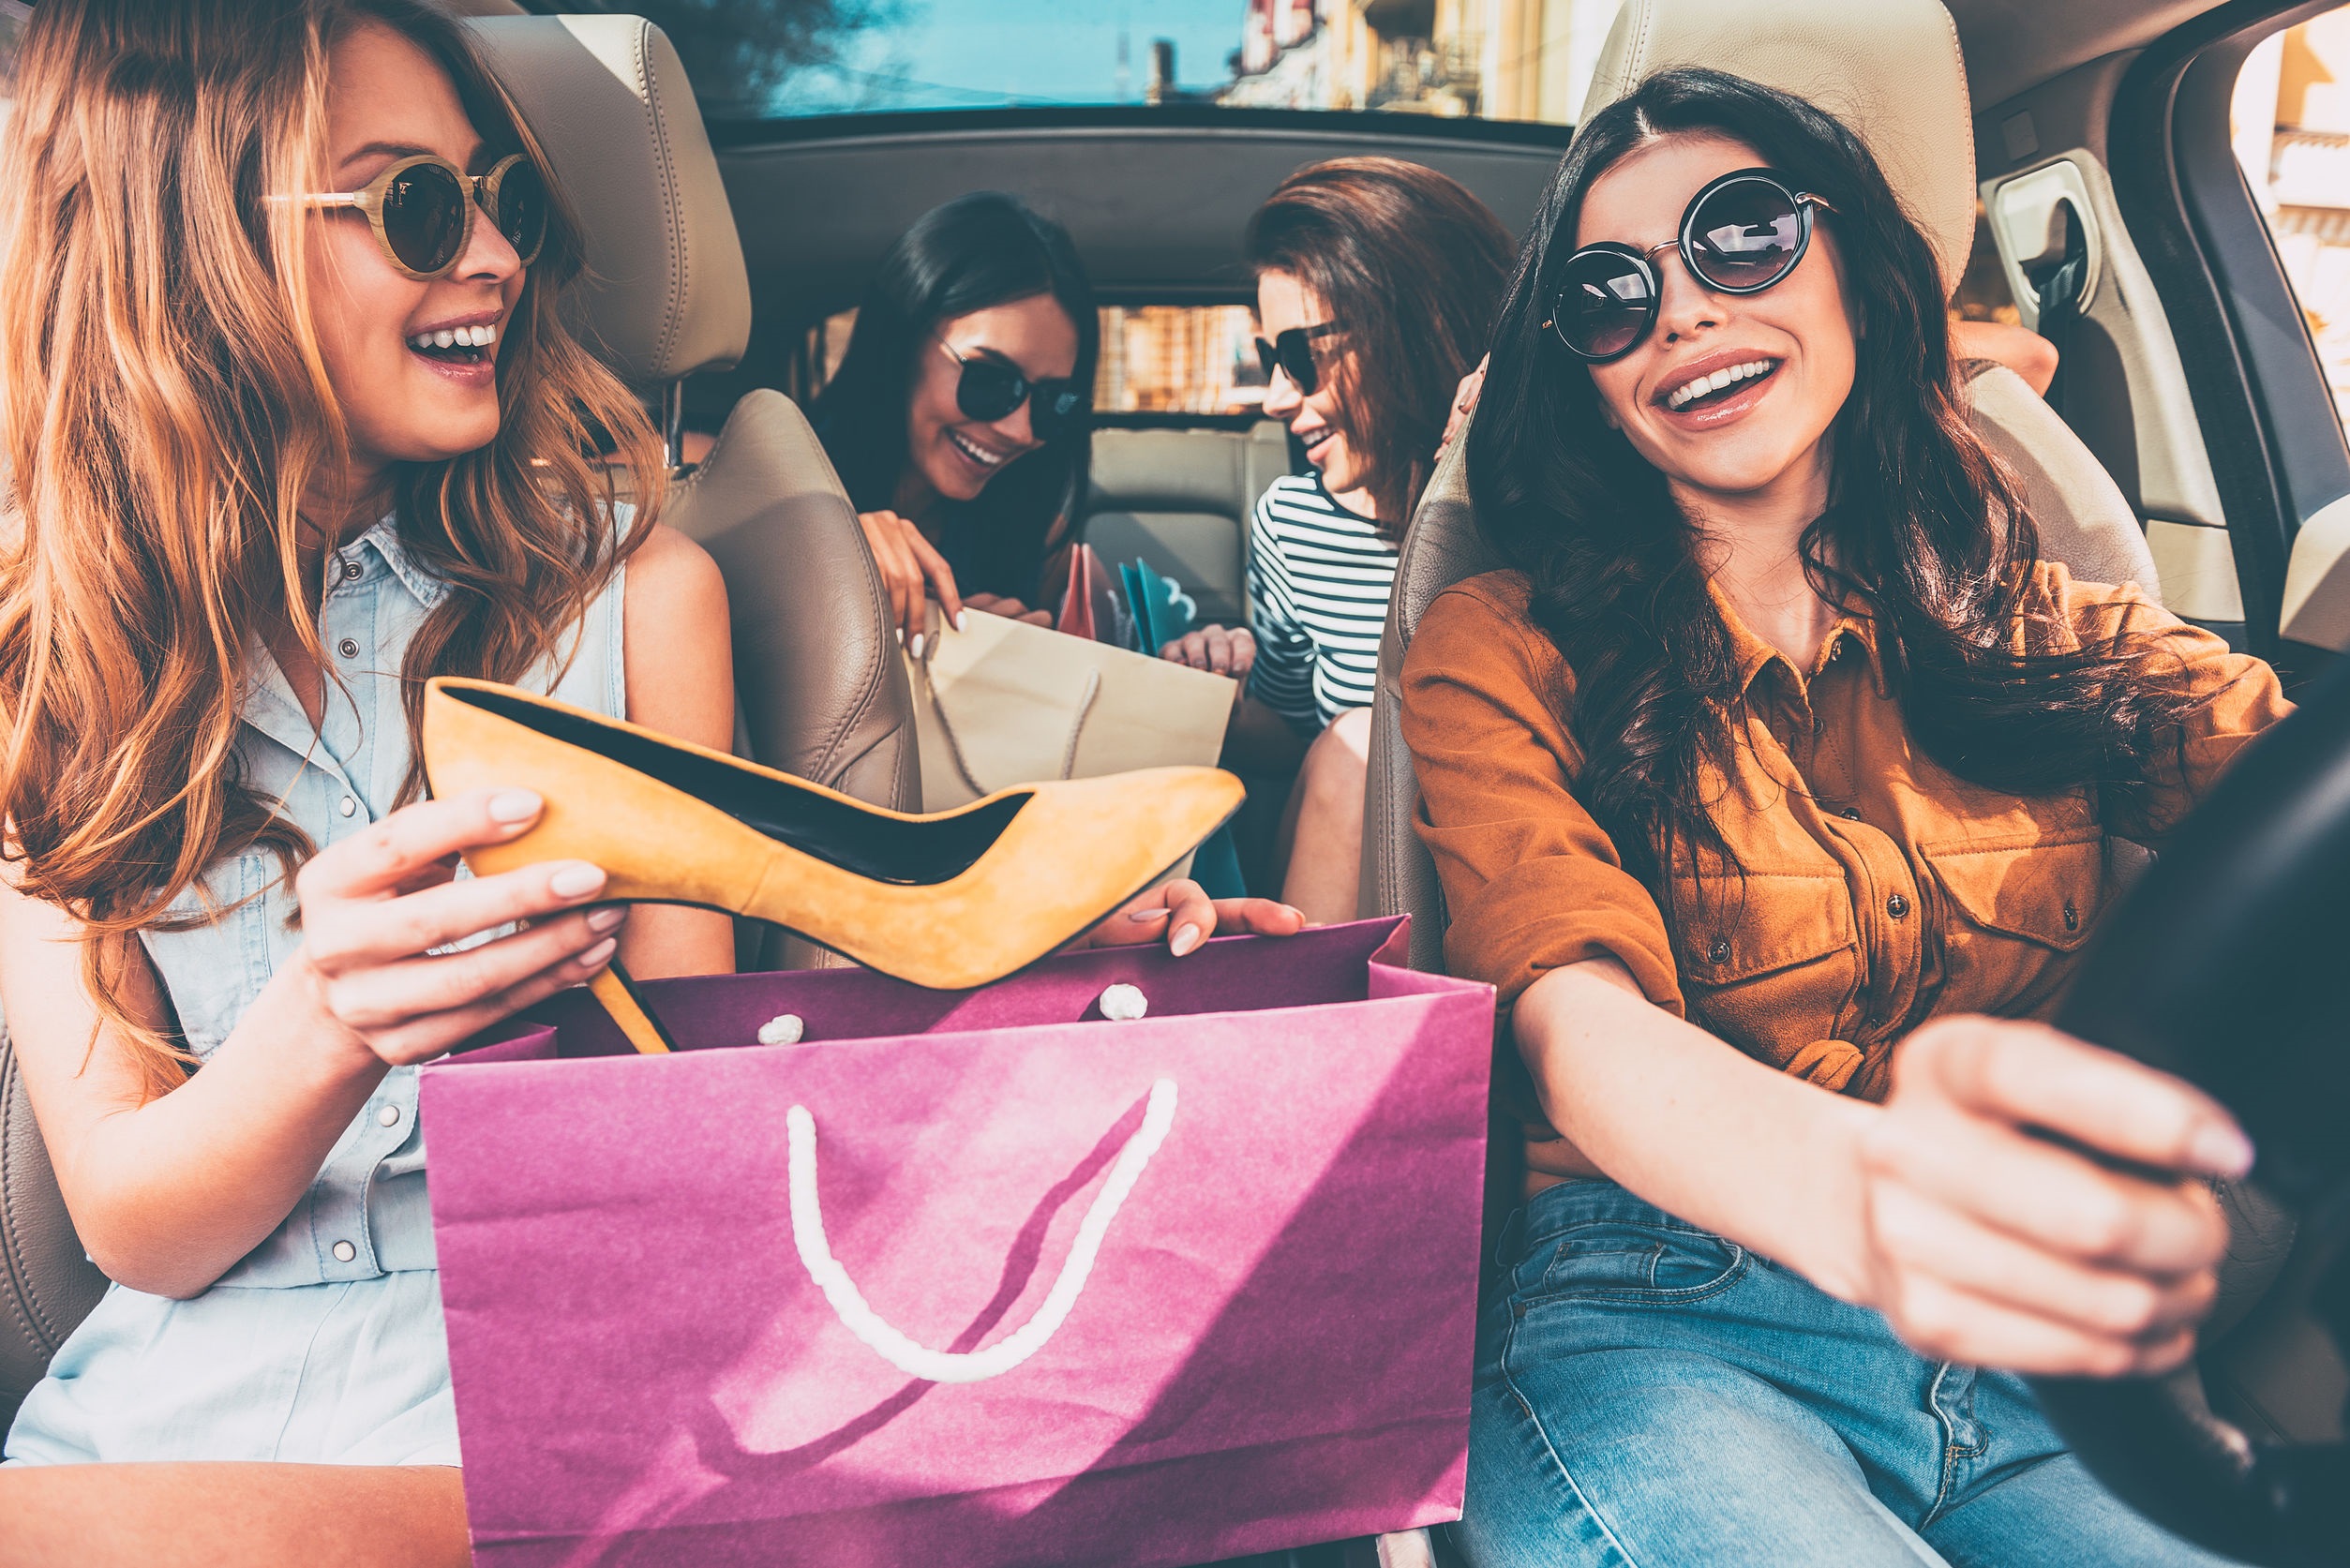 Next stop is lingerie shop! Four beautiful young cheerful women holding  shopping bags and looking at each other with smile while sitting in car -  The Shops at Hilltop